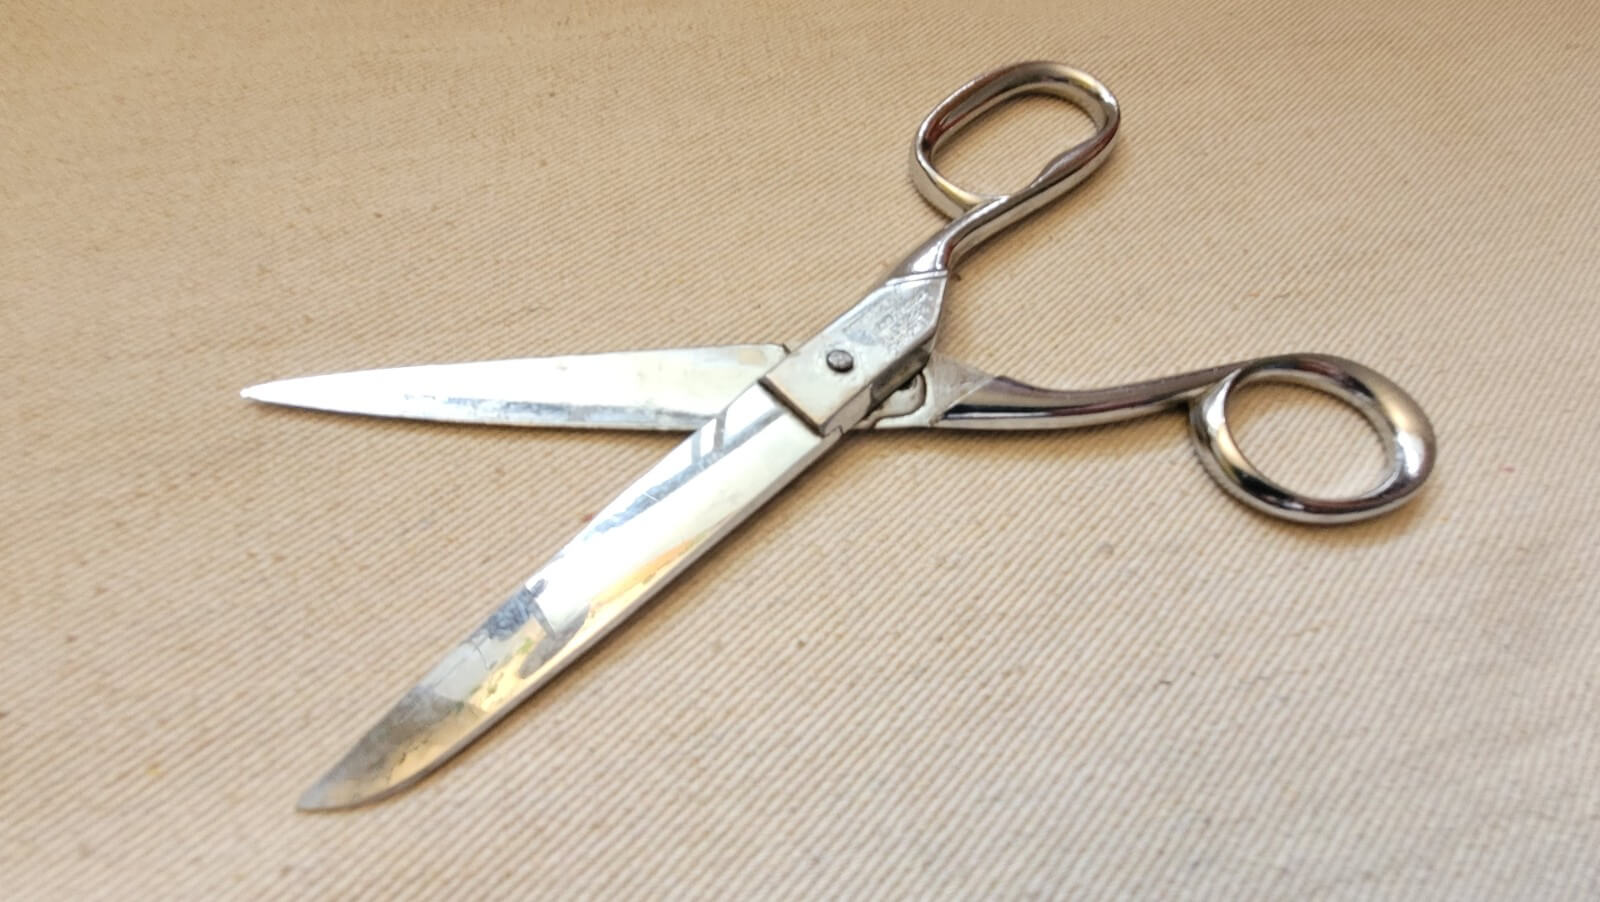 Richards Speedway Masterpiece Rustless Chrome Scissors Shefield England - Antique and Vintage Tailor Sewing and Upholstery Cutting Tools